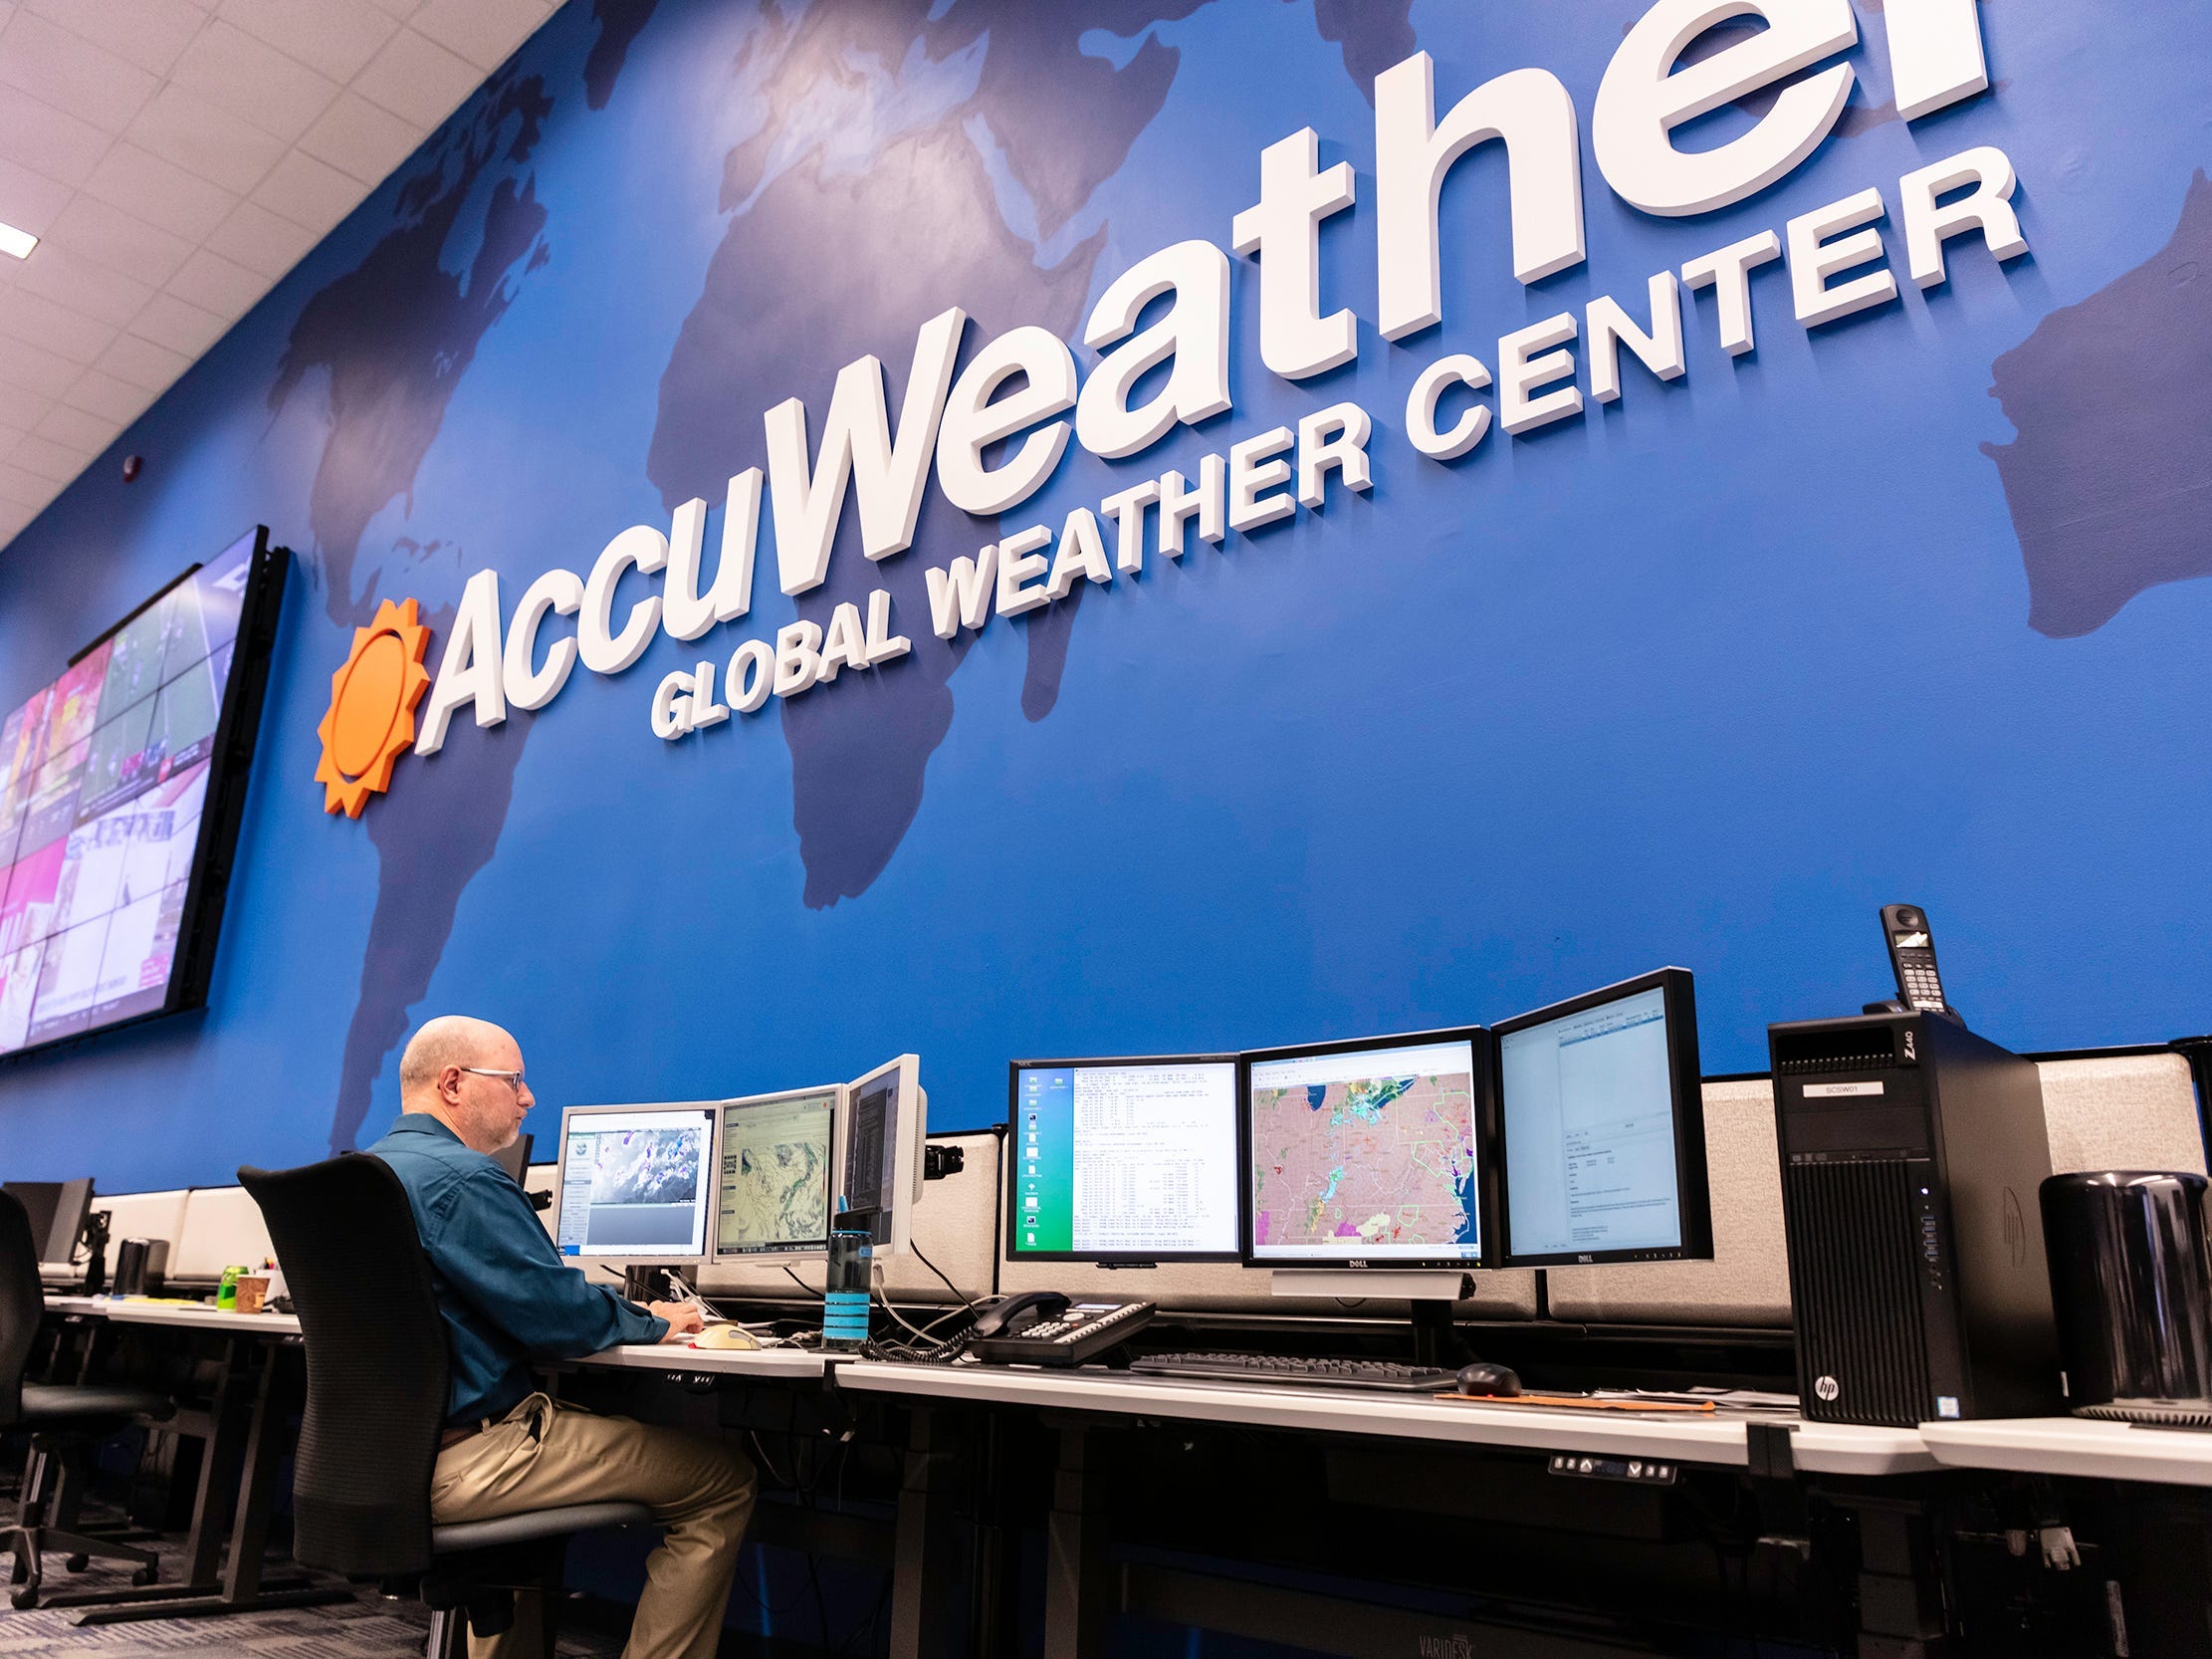 Brian Wimer at work at AccuWeather